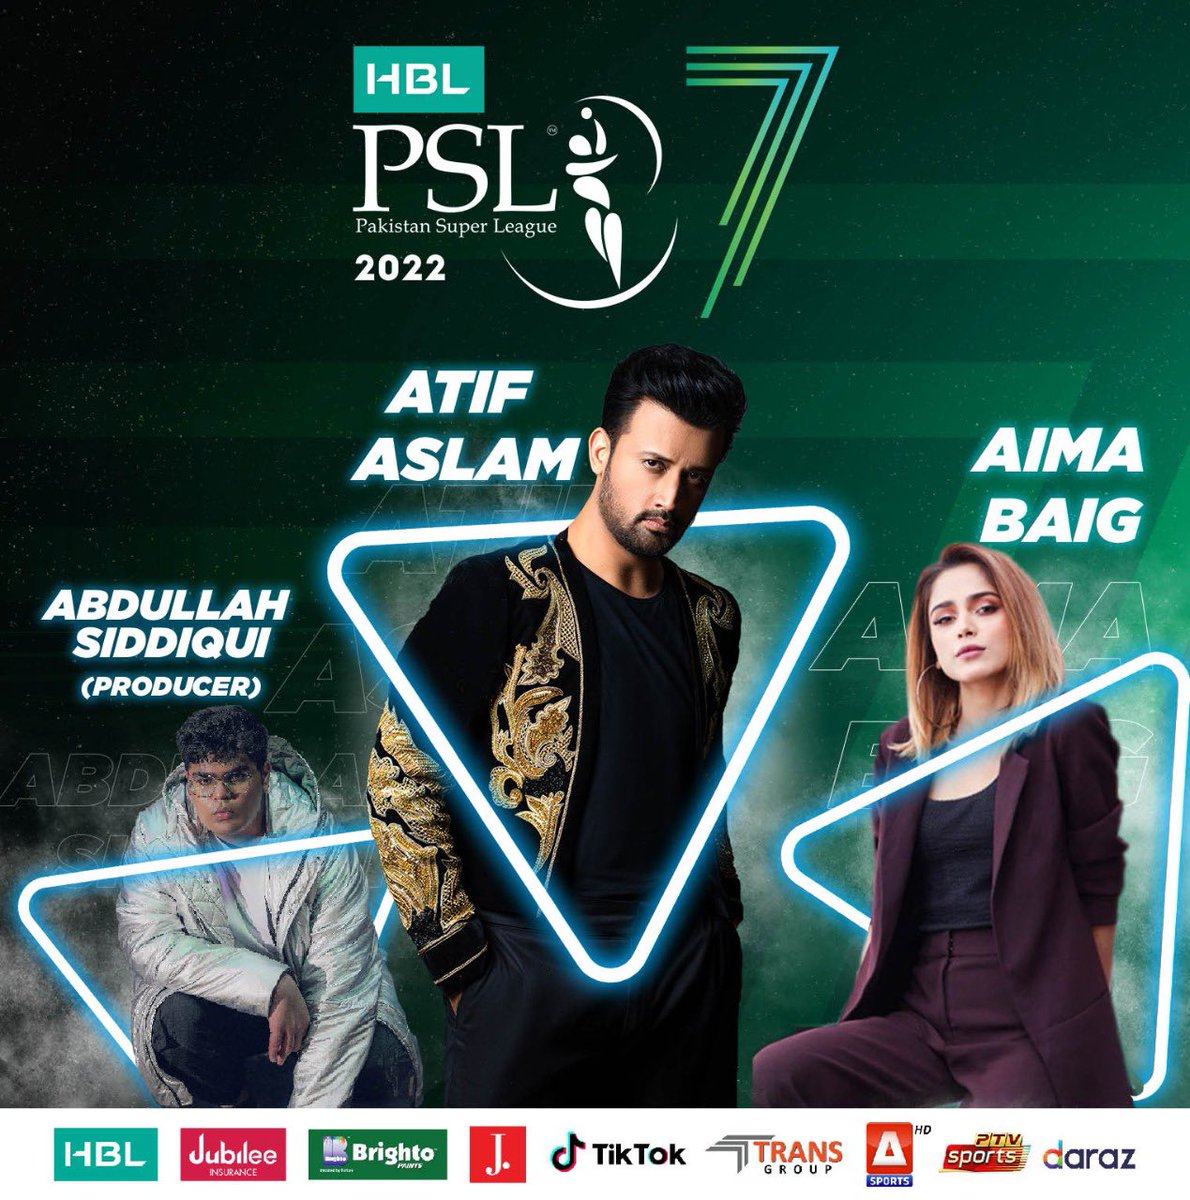 🚨 Breaking News 🚨 

The #HBLPSL7 anthem will feature the voices of @itsaadee and Aima Baig, and will be produced by @abdullah_s_sid. 
Excited?

Read more: psl-t20.com/news/1283 

#LevelHai